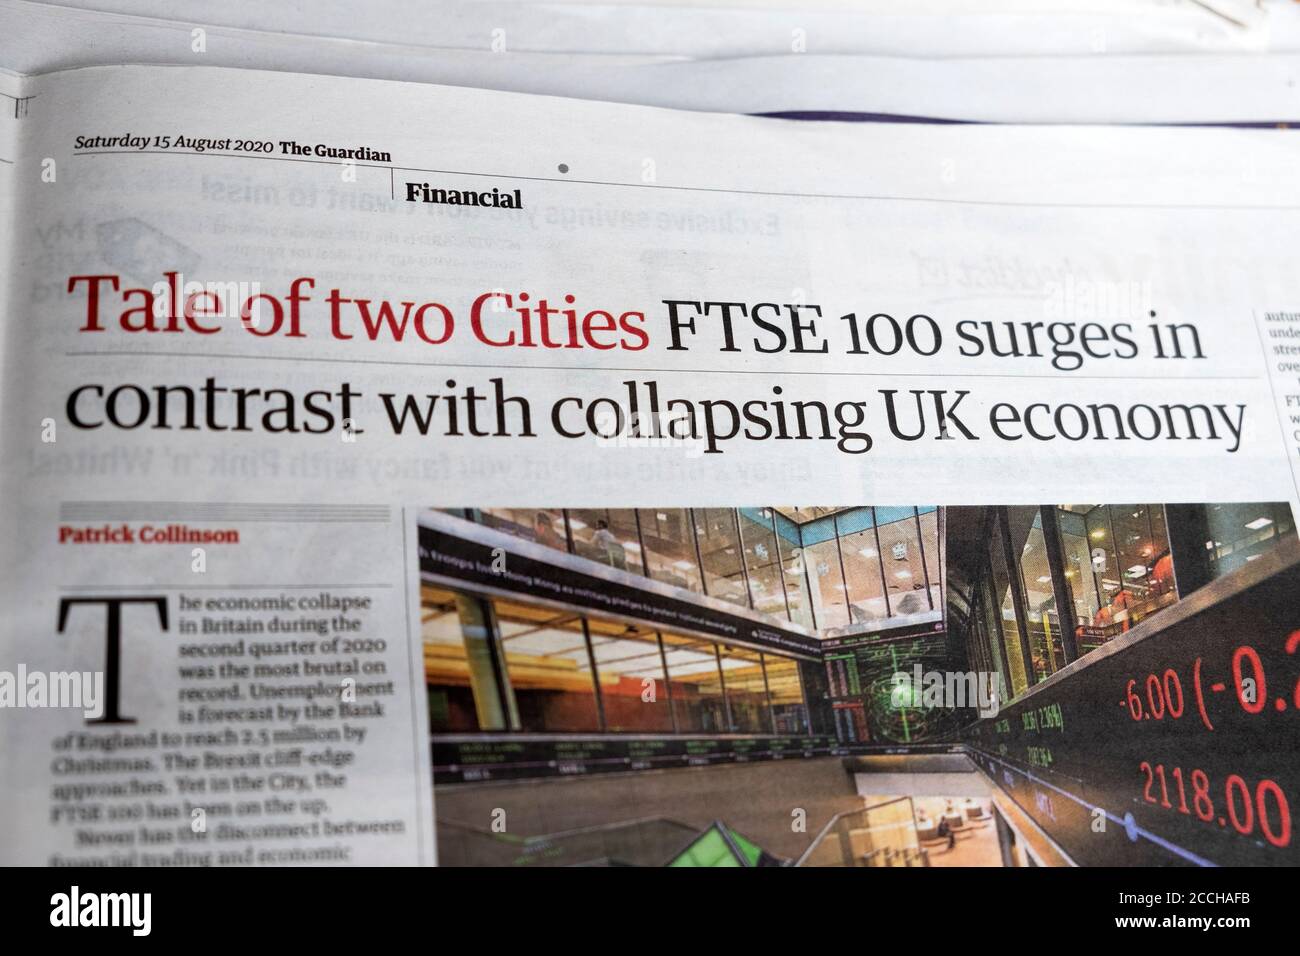 'Tale of two Cities' "FTSE 100 surges in contrast with collapsing UK economy" Guardian newspaper headline inside article August 2020 London England UK Stock Photo